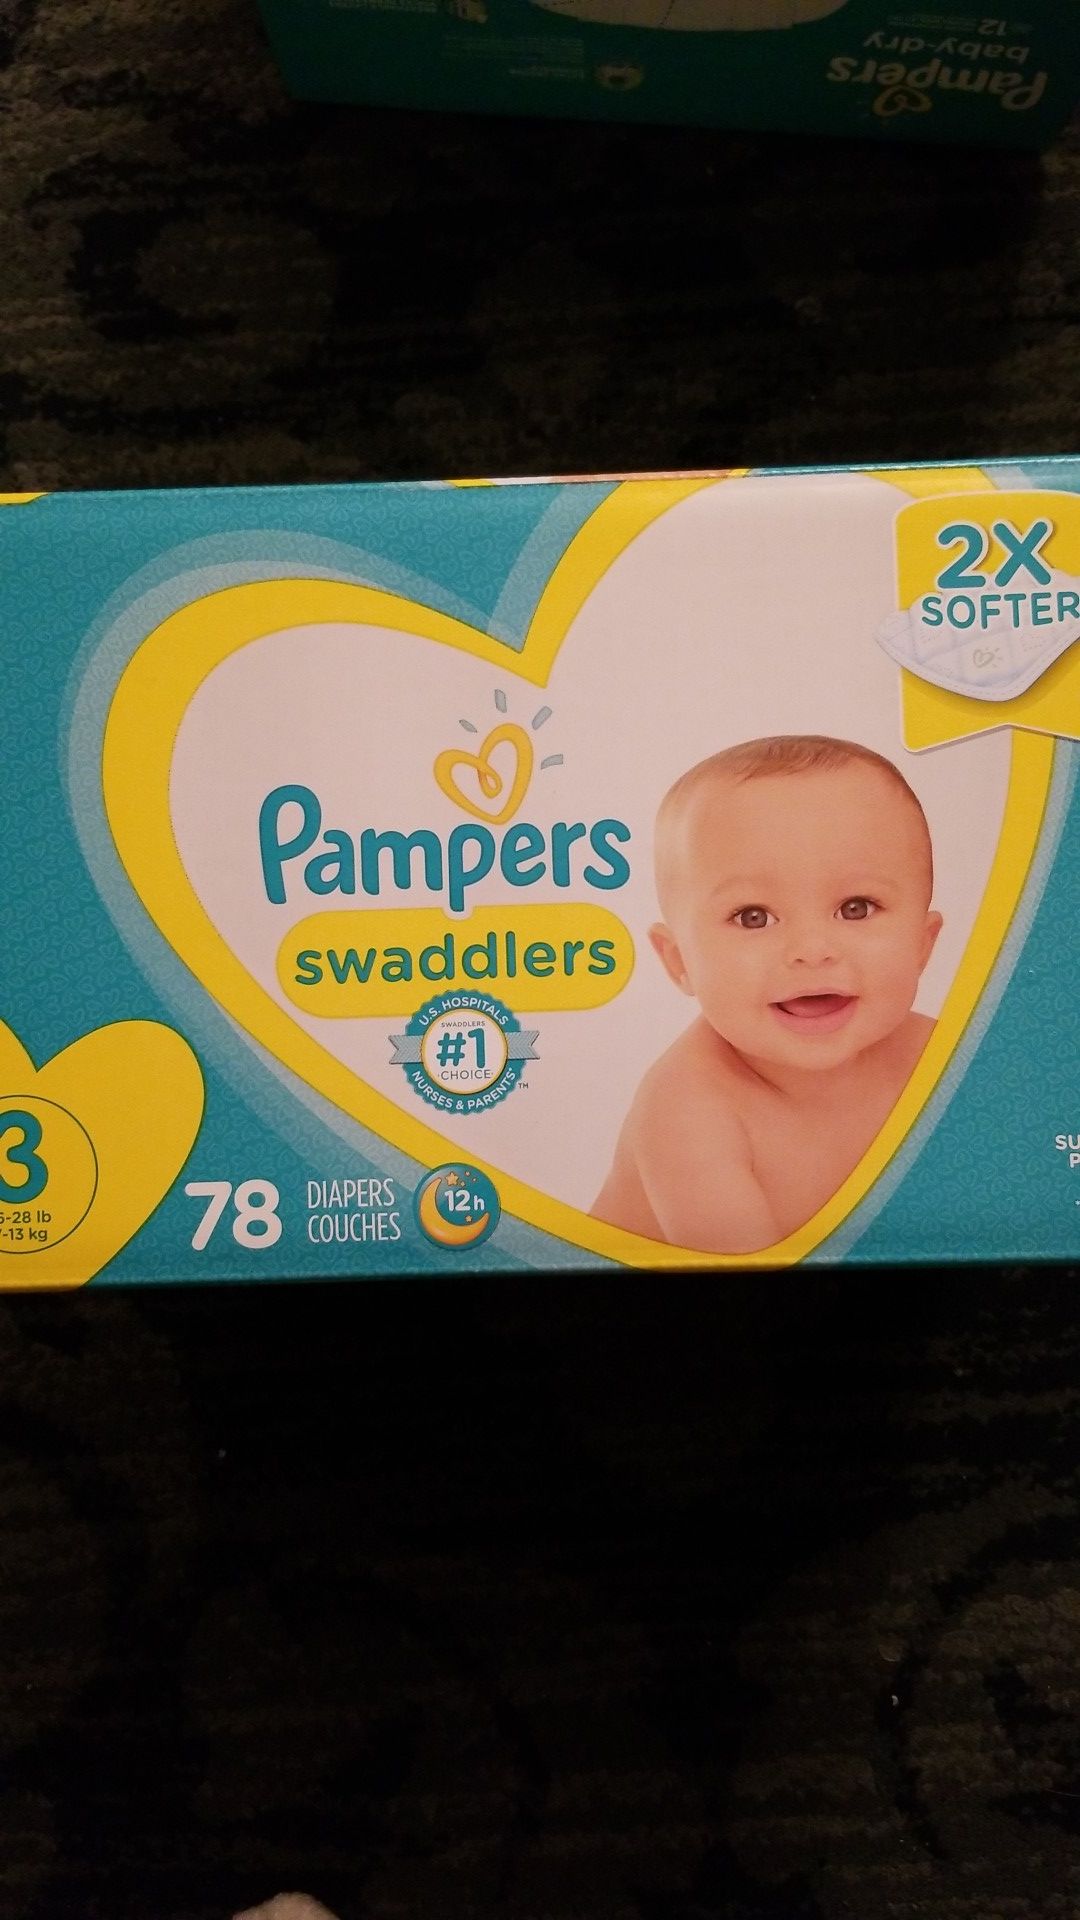 Pampers swaddlers diapers size 3 78ct.